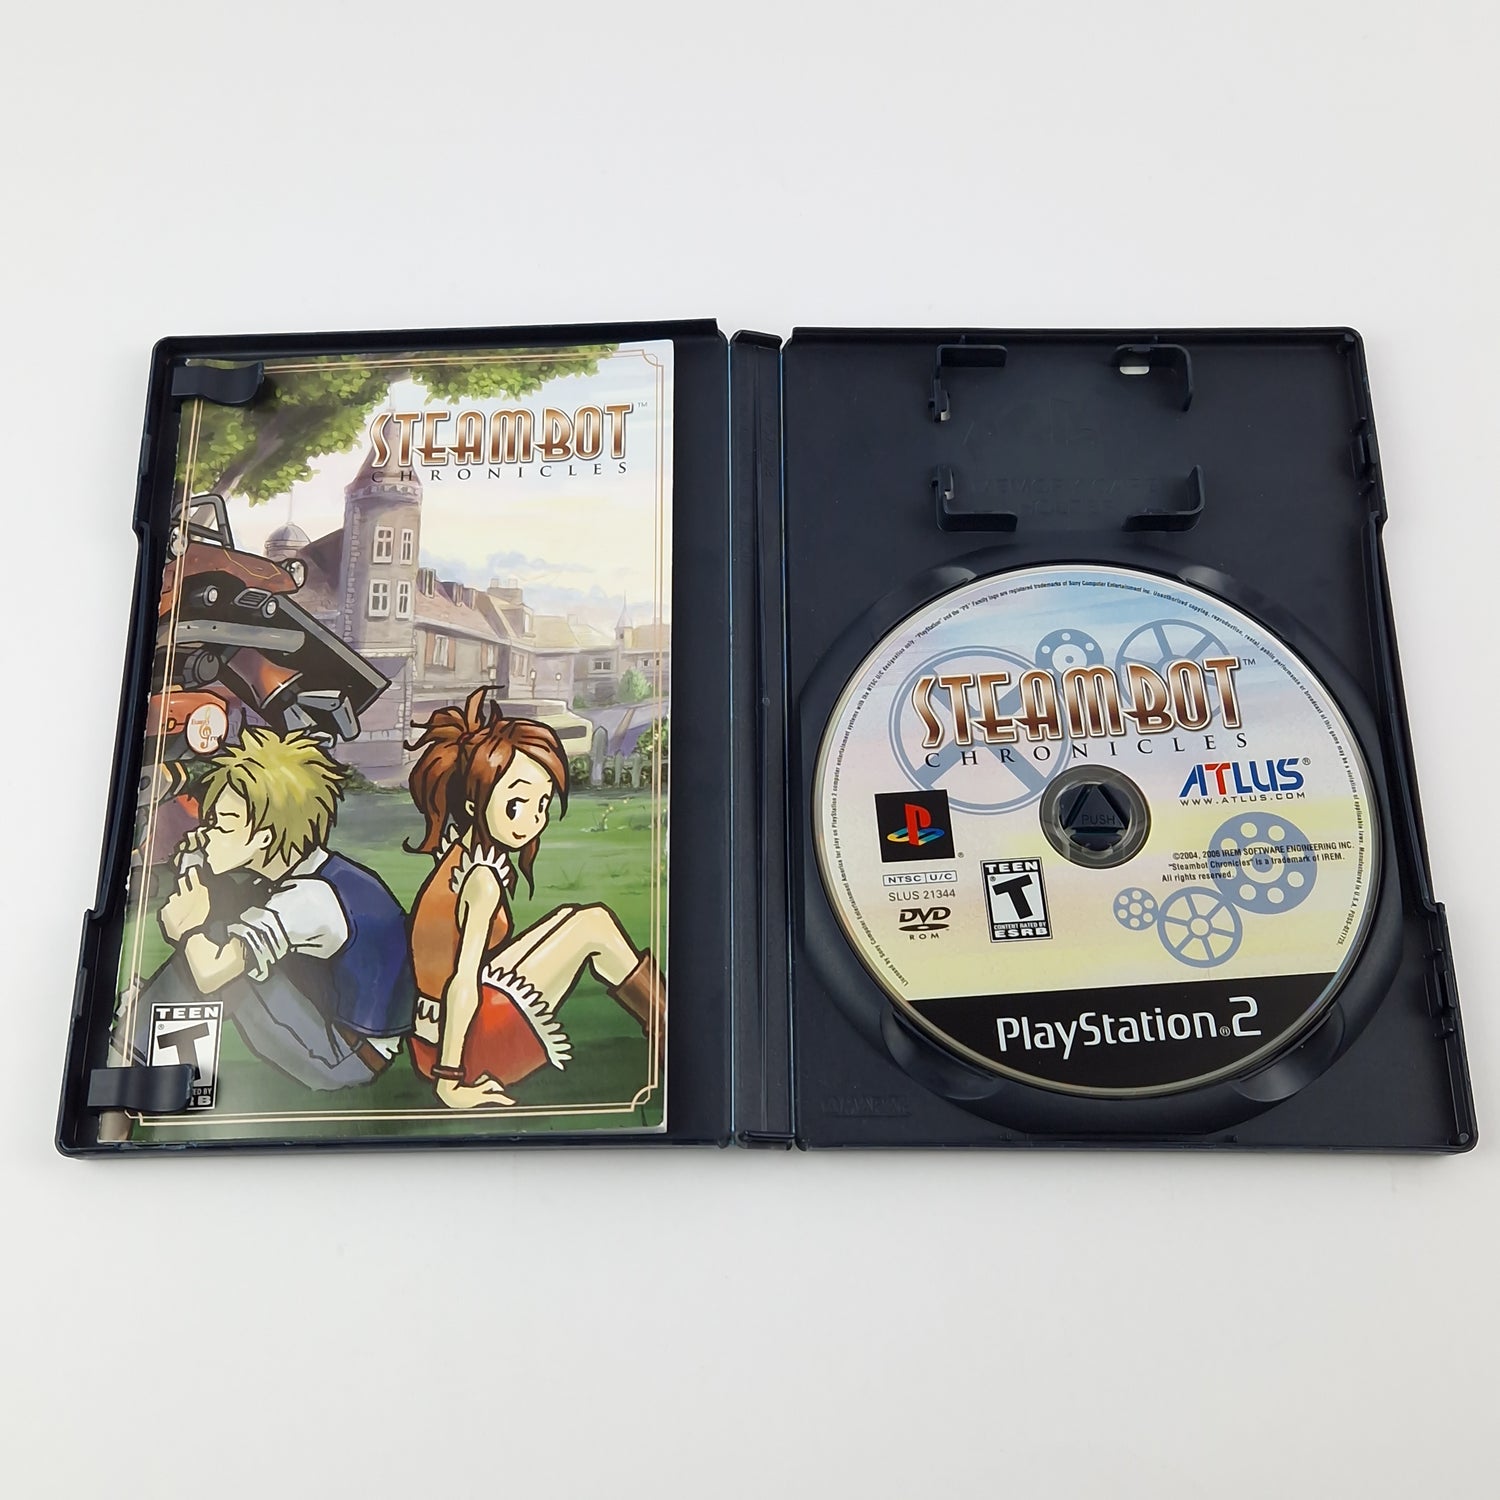 Sony Playstation 2 Spiel : Steambot Chronicles - OVP Anleitung PS2 NTSC-U/C USA